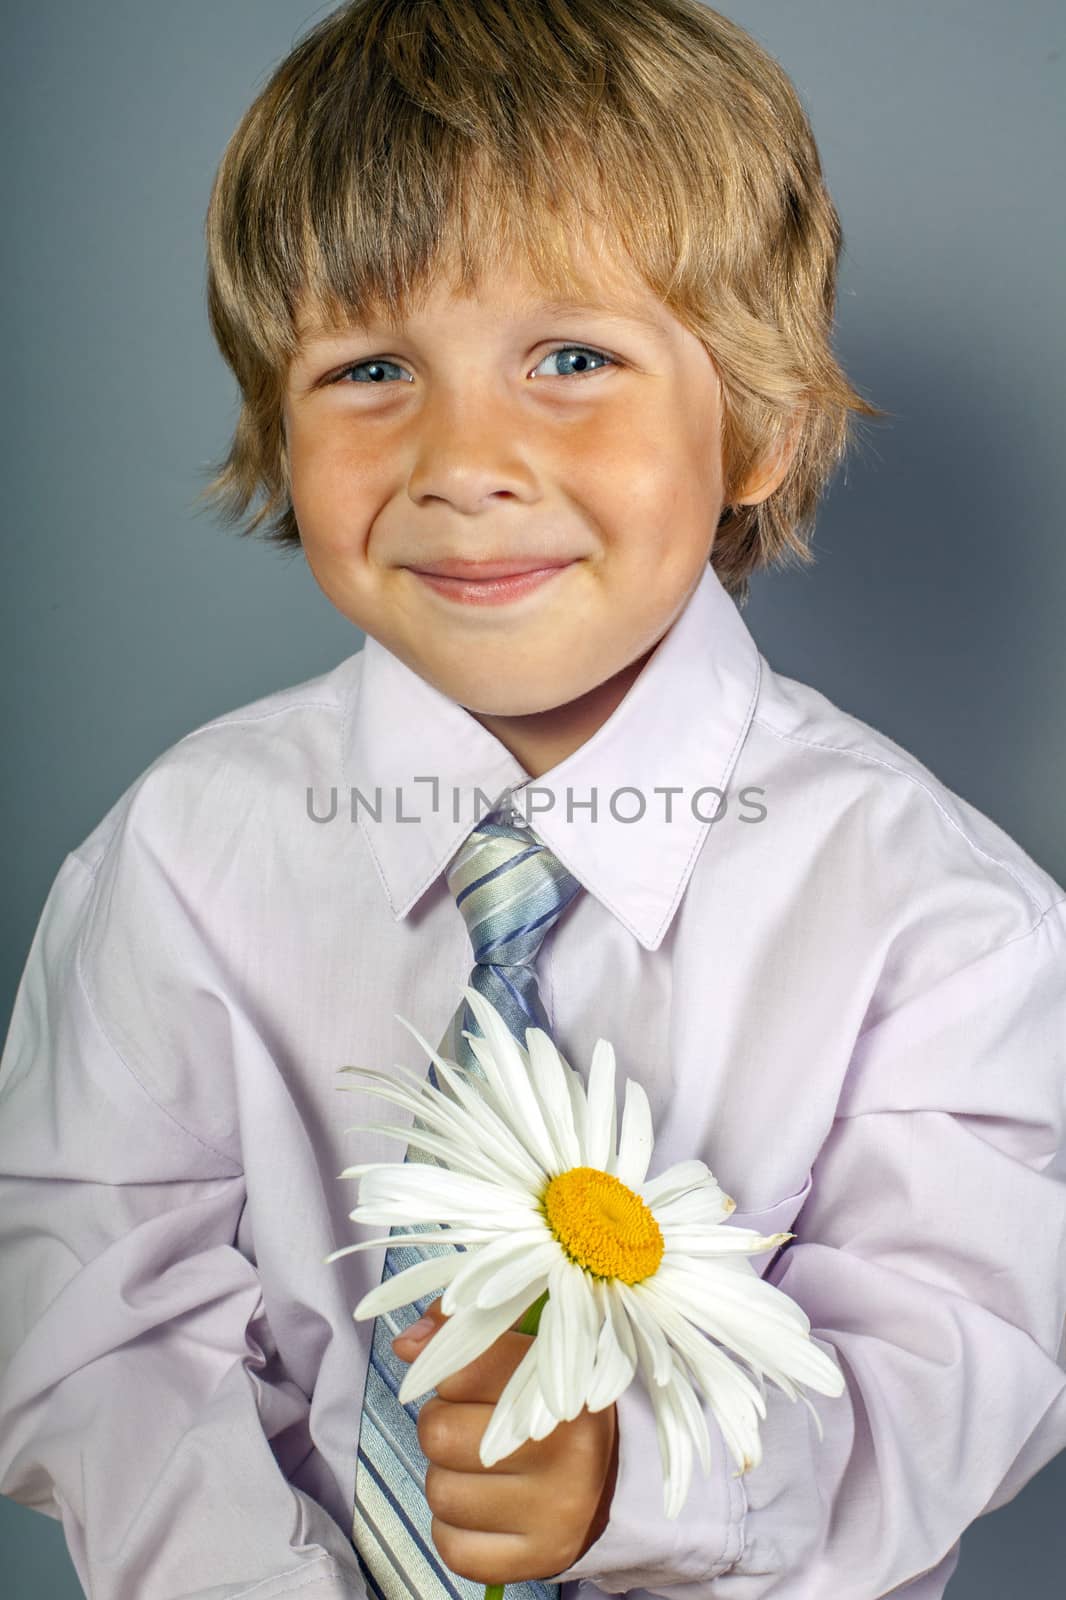 handsome boy wearing classic suit with flowers in hands